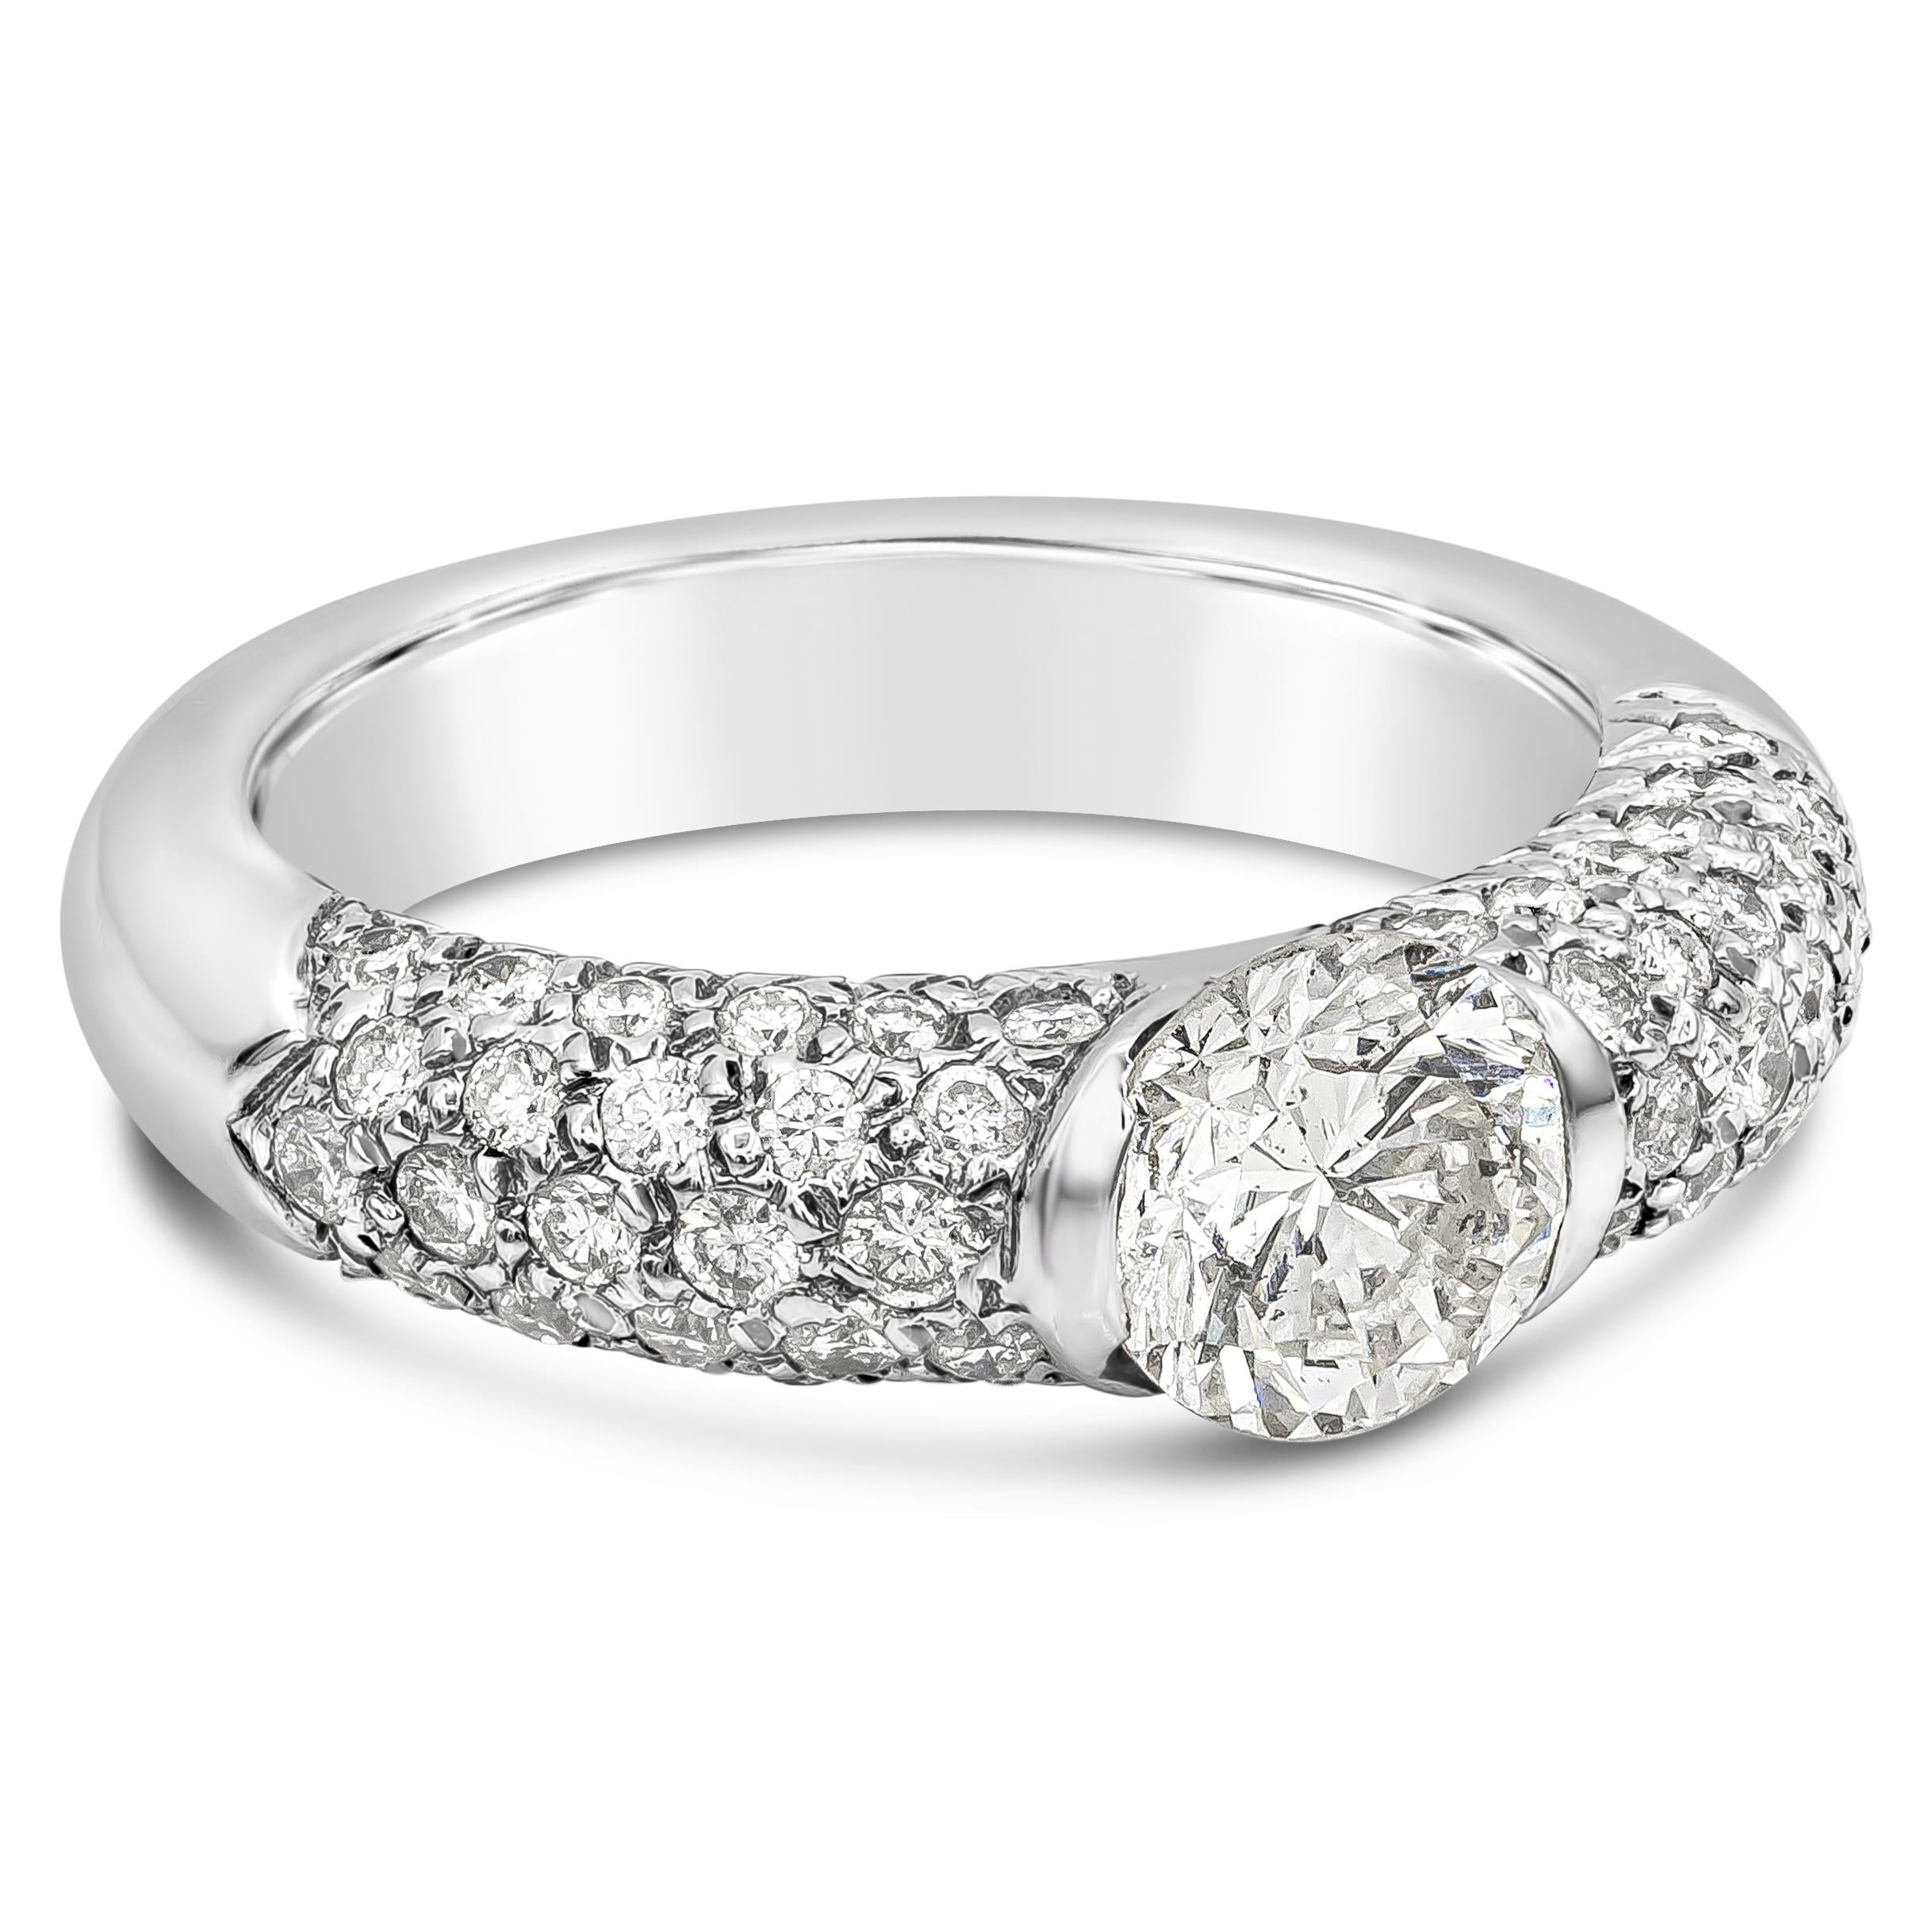 This gorgeous ring has a beautiful unique half bezel design with a 1.35 carats brilliant round diamond center stone, K-L color, SI2 in clarity. Accented by round brilliant melee diamonds on each side weighing 1.04 carats total, set in a pave set